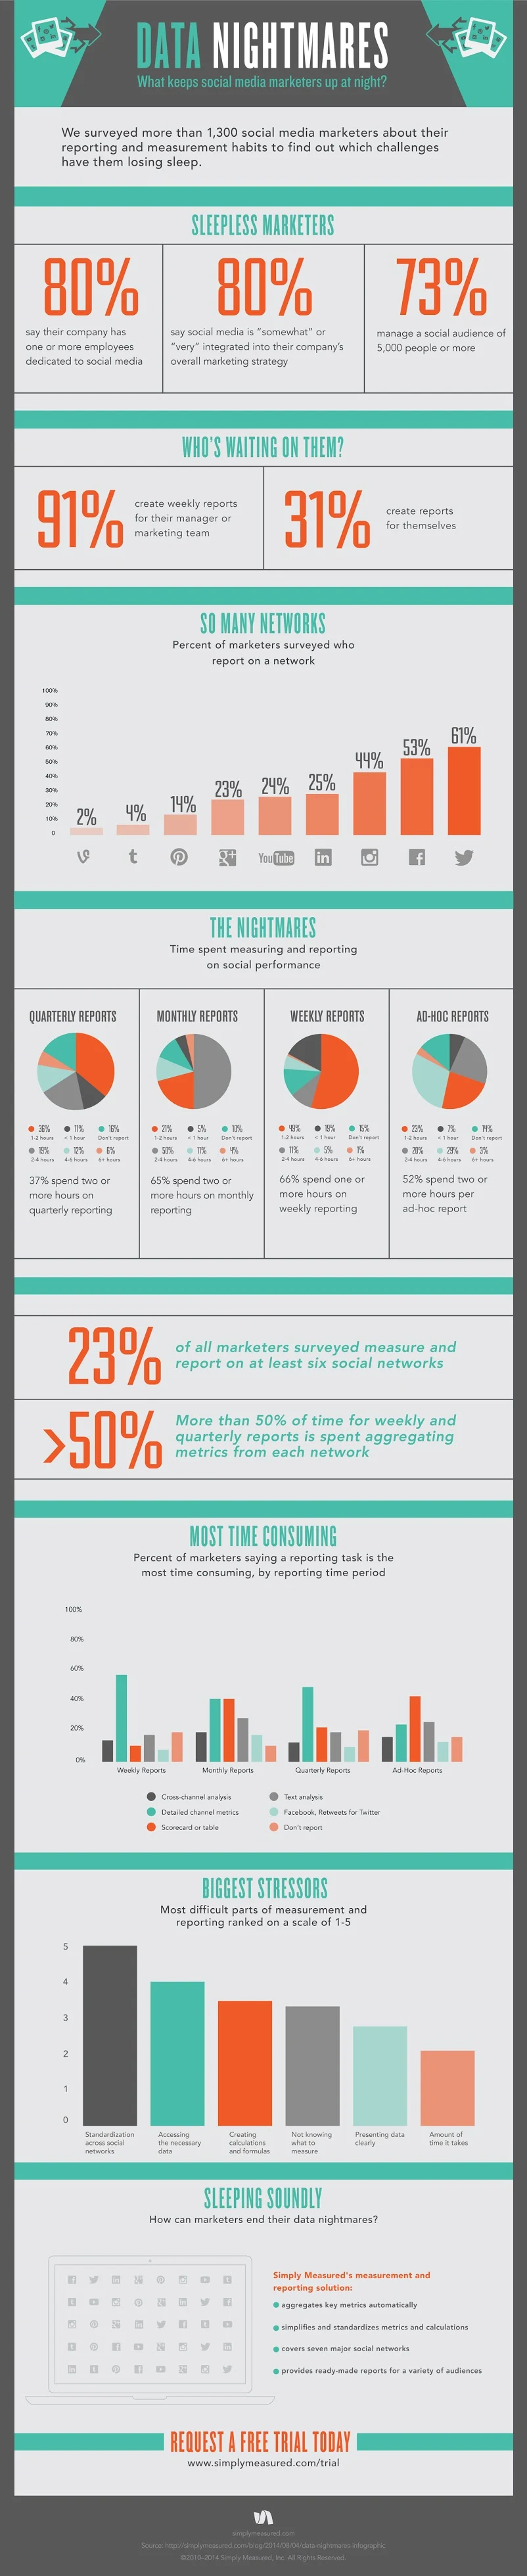 Data Nightmares: What Keeps Social Media Marketers Up at Night? - #infographic